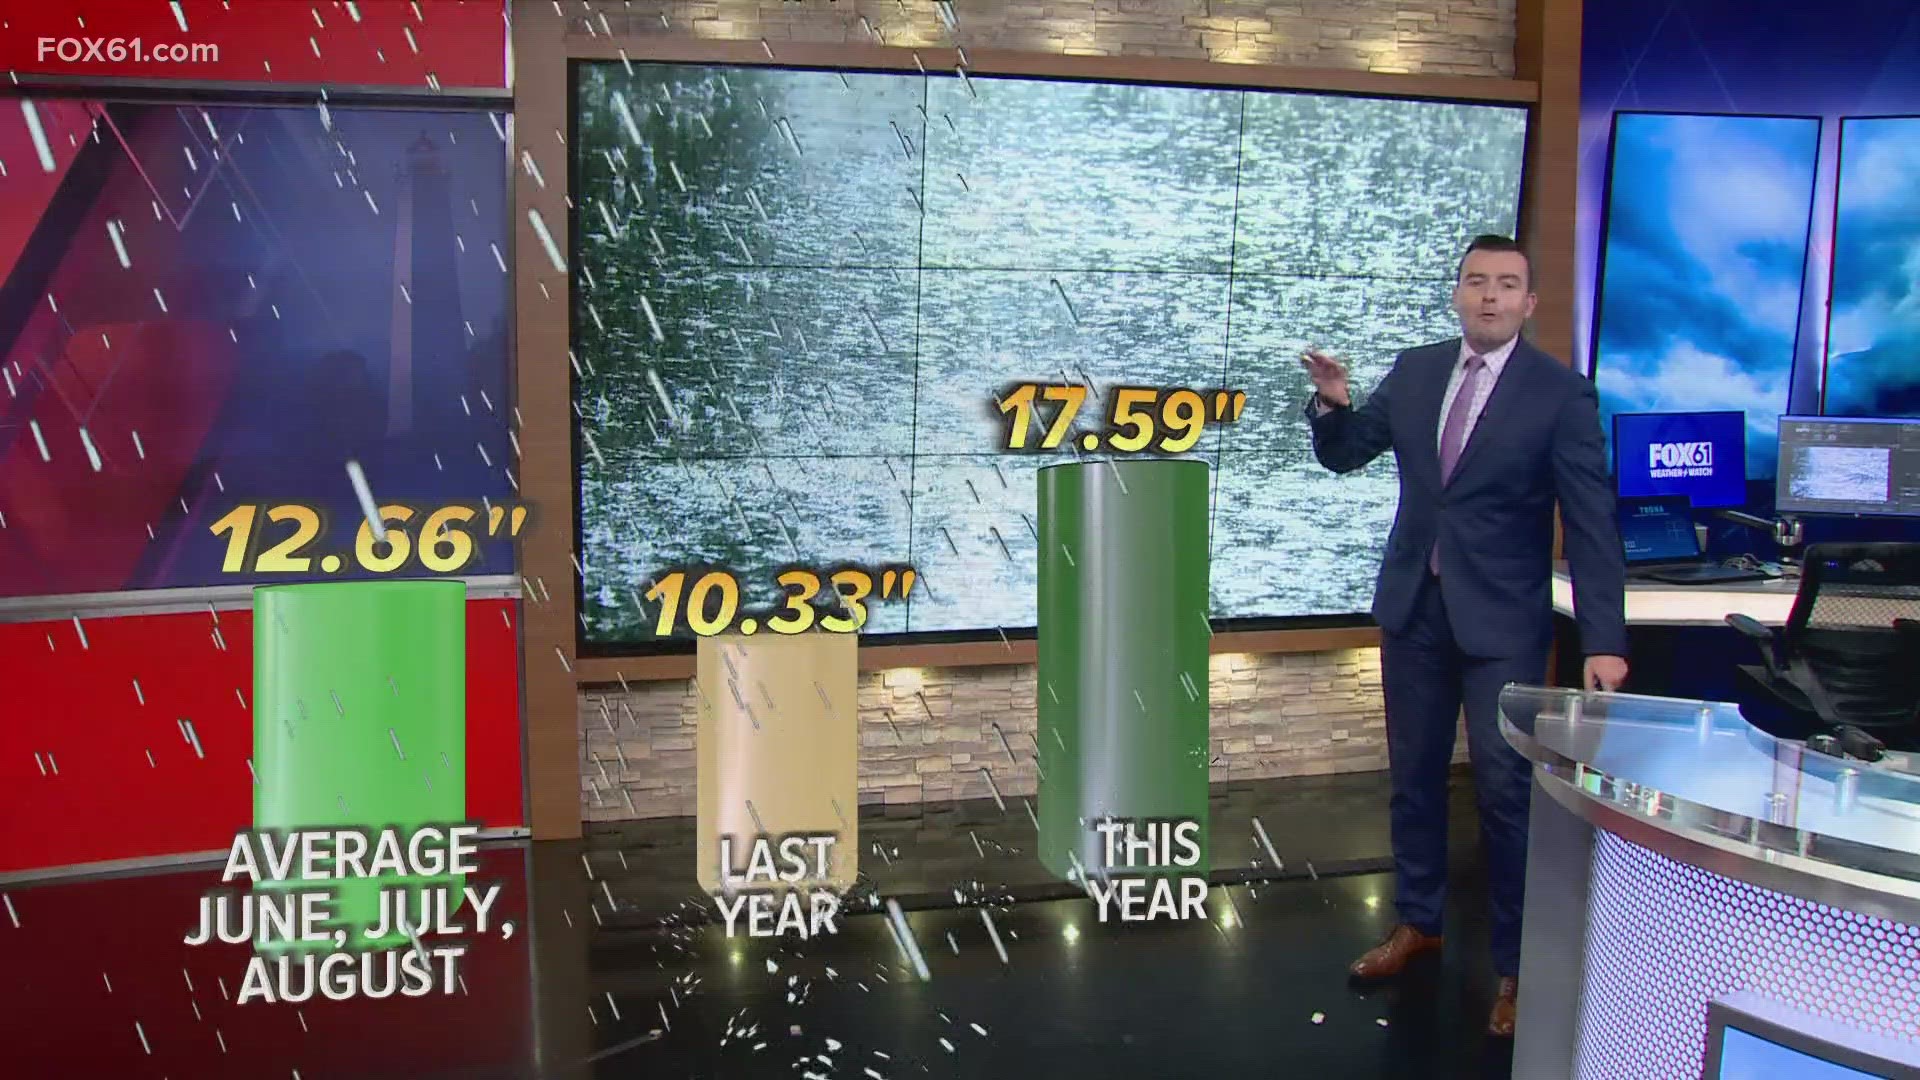 There are still more than two weeks left in August, but the rain totals this summer are impressive.